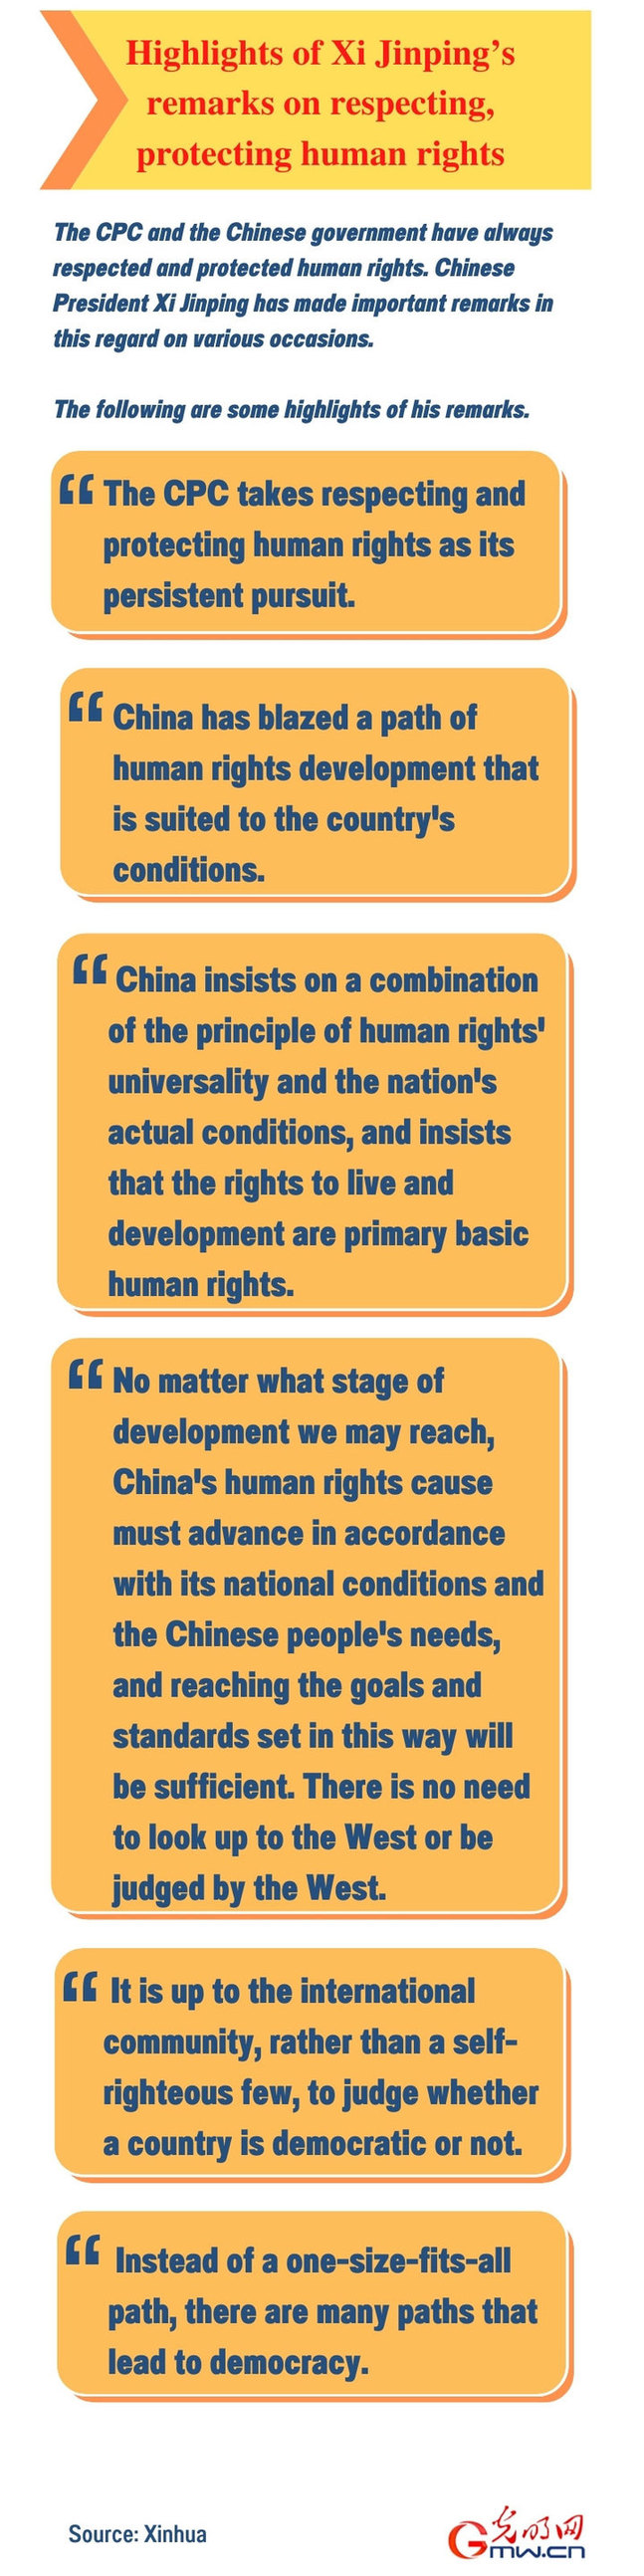 Highlights of Xi Jinping’s remarks on respecting, protecting human rights